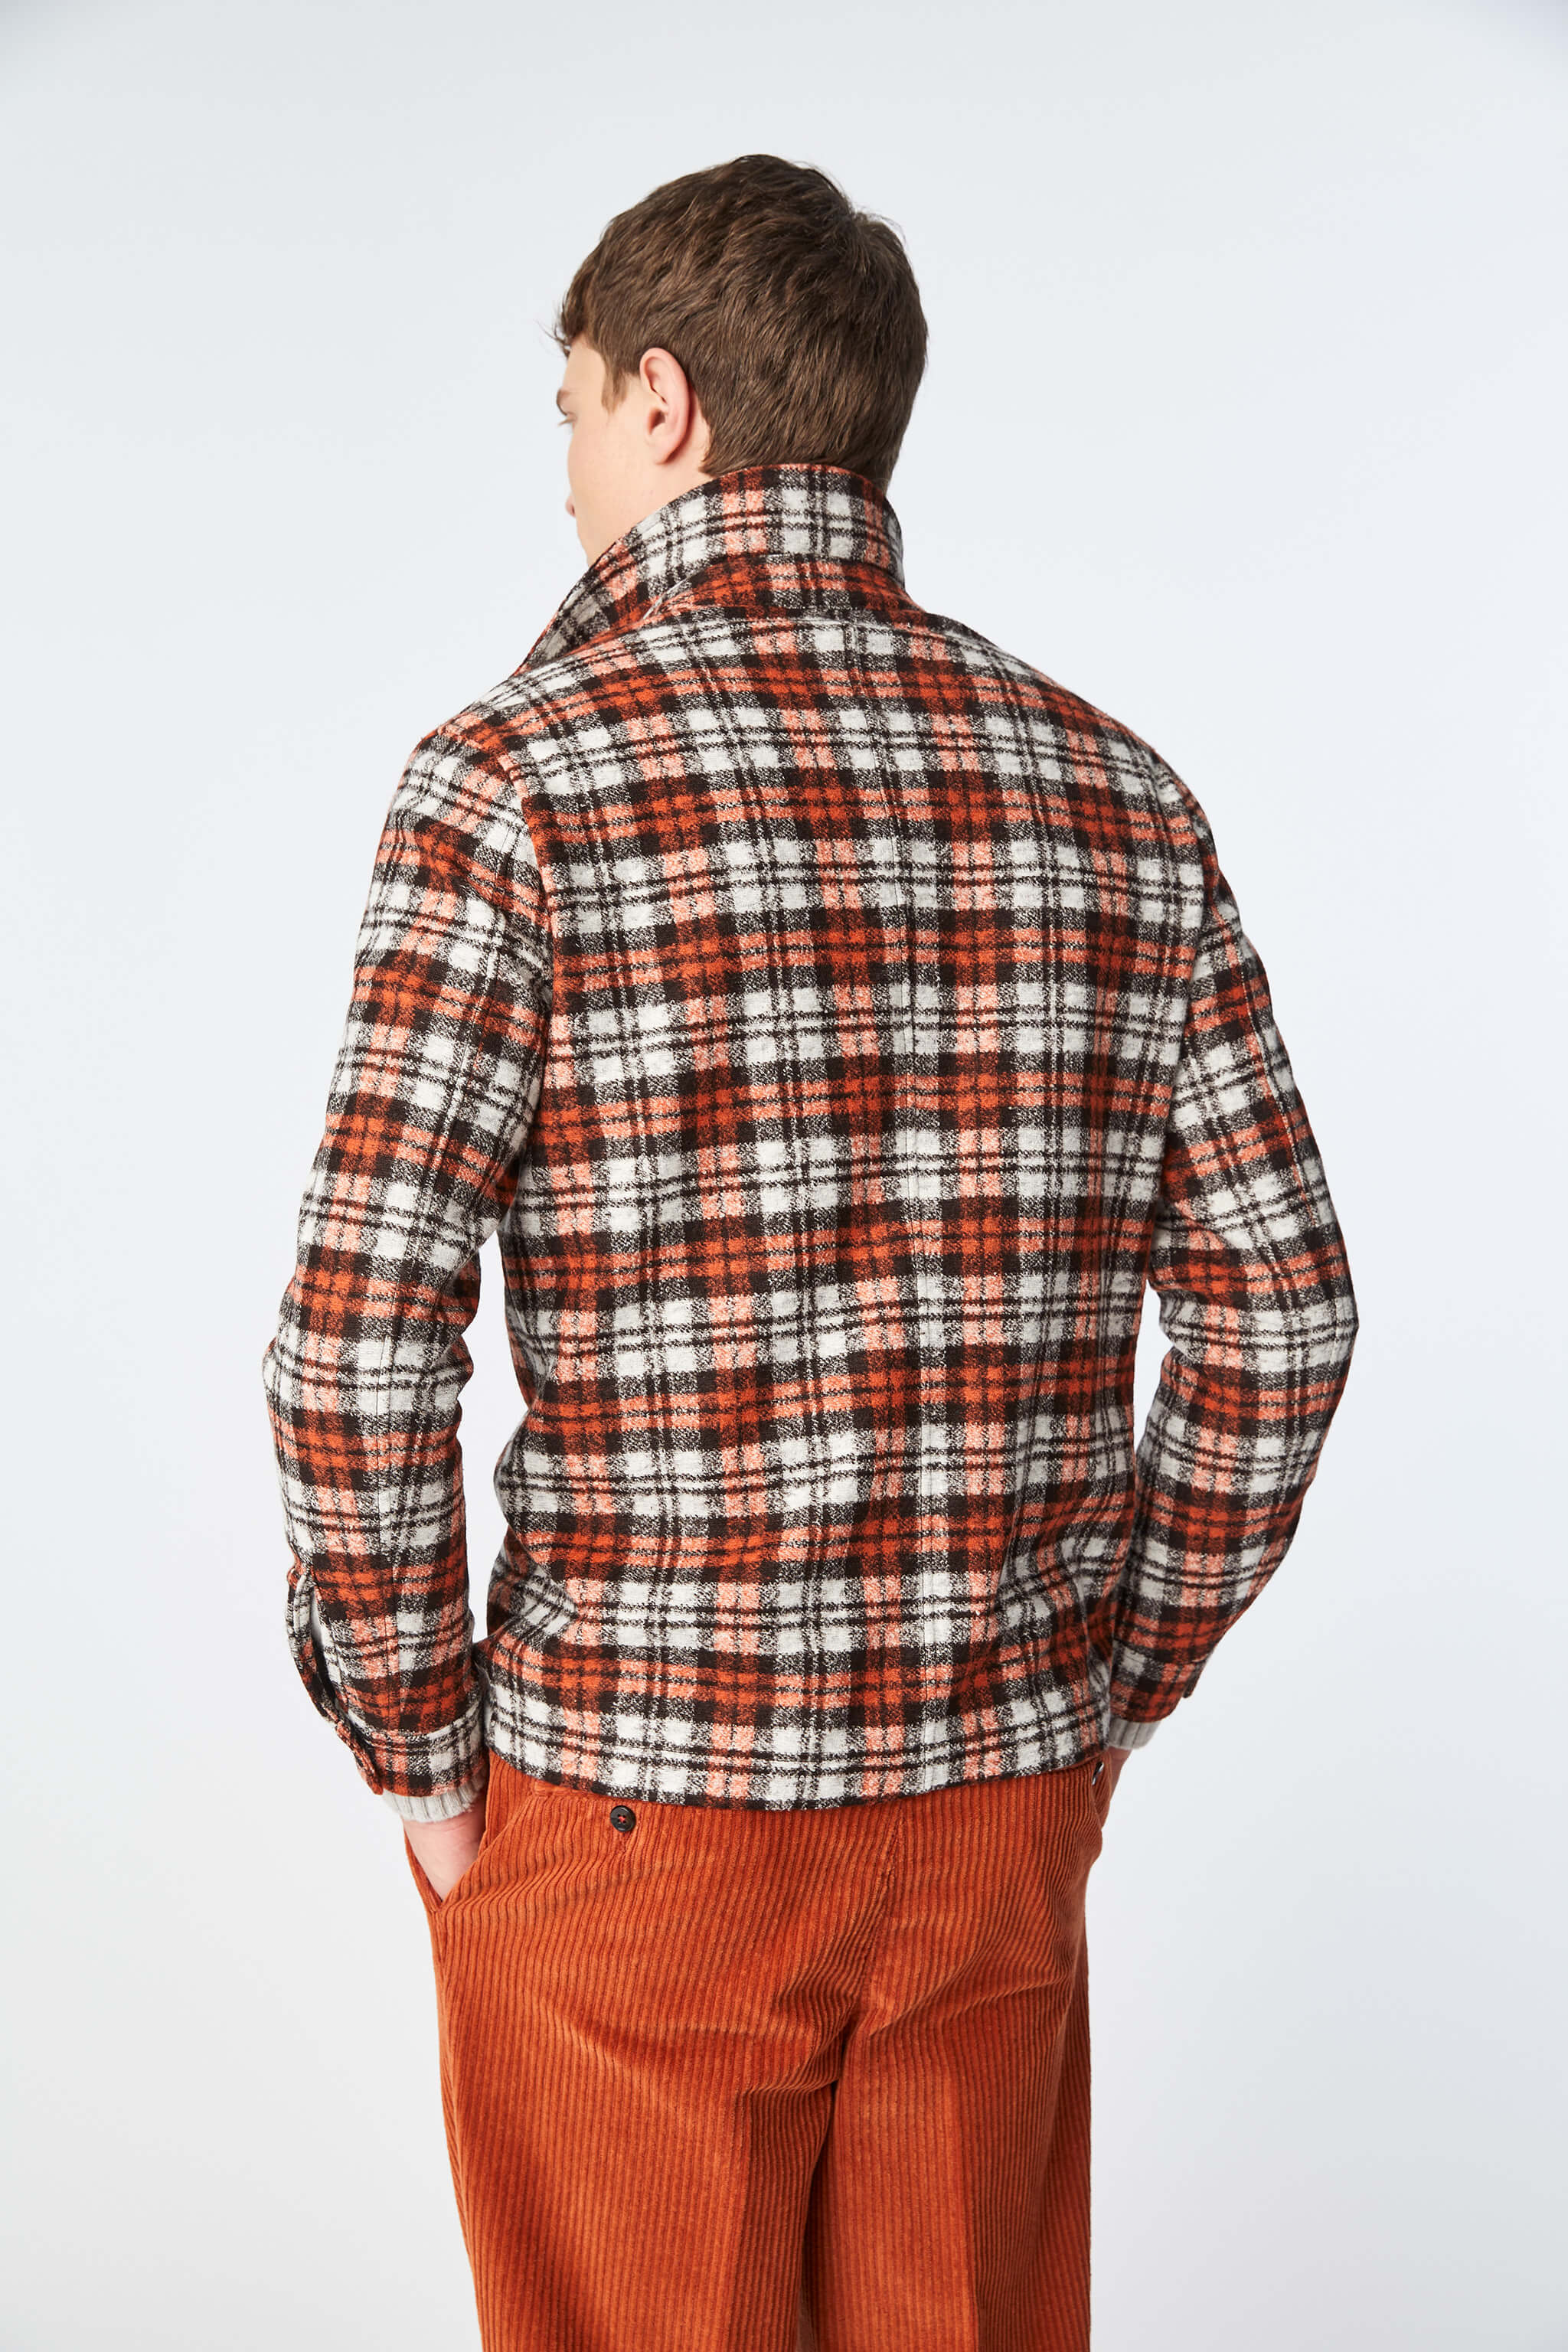 Overshirt in brown jersey